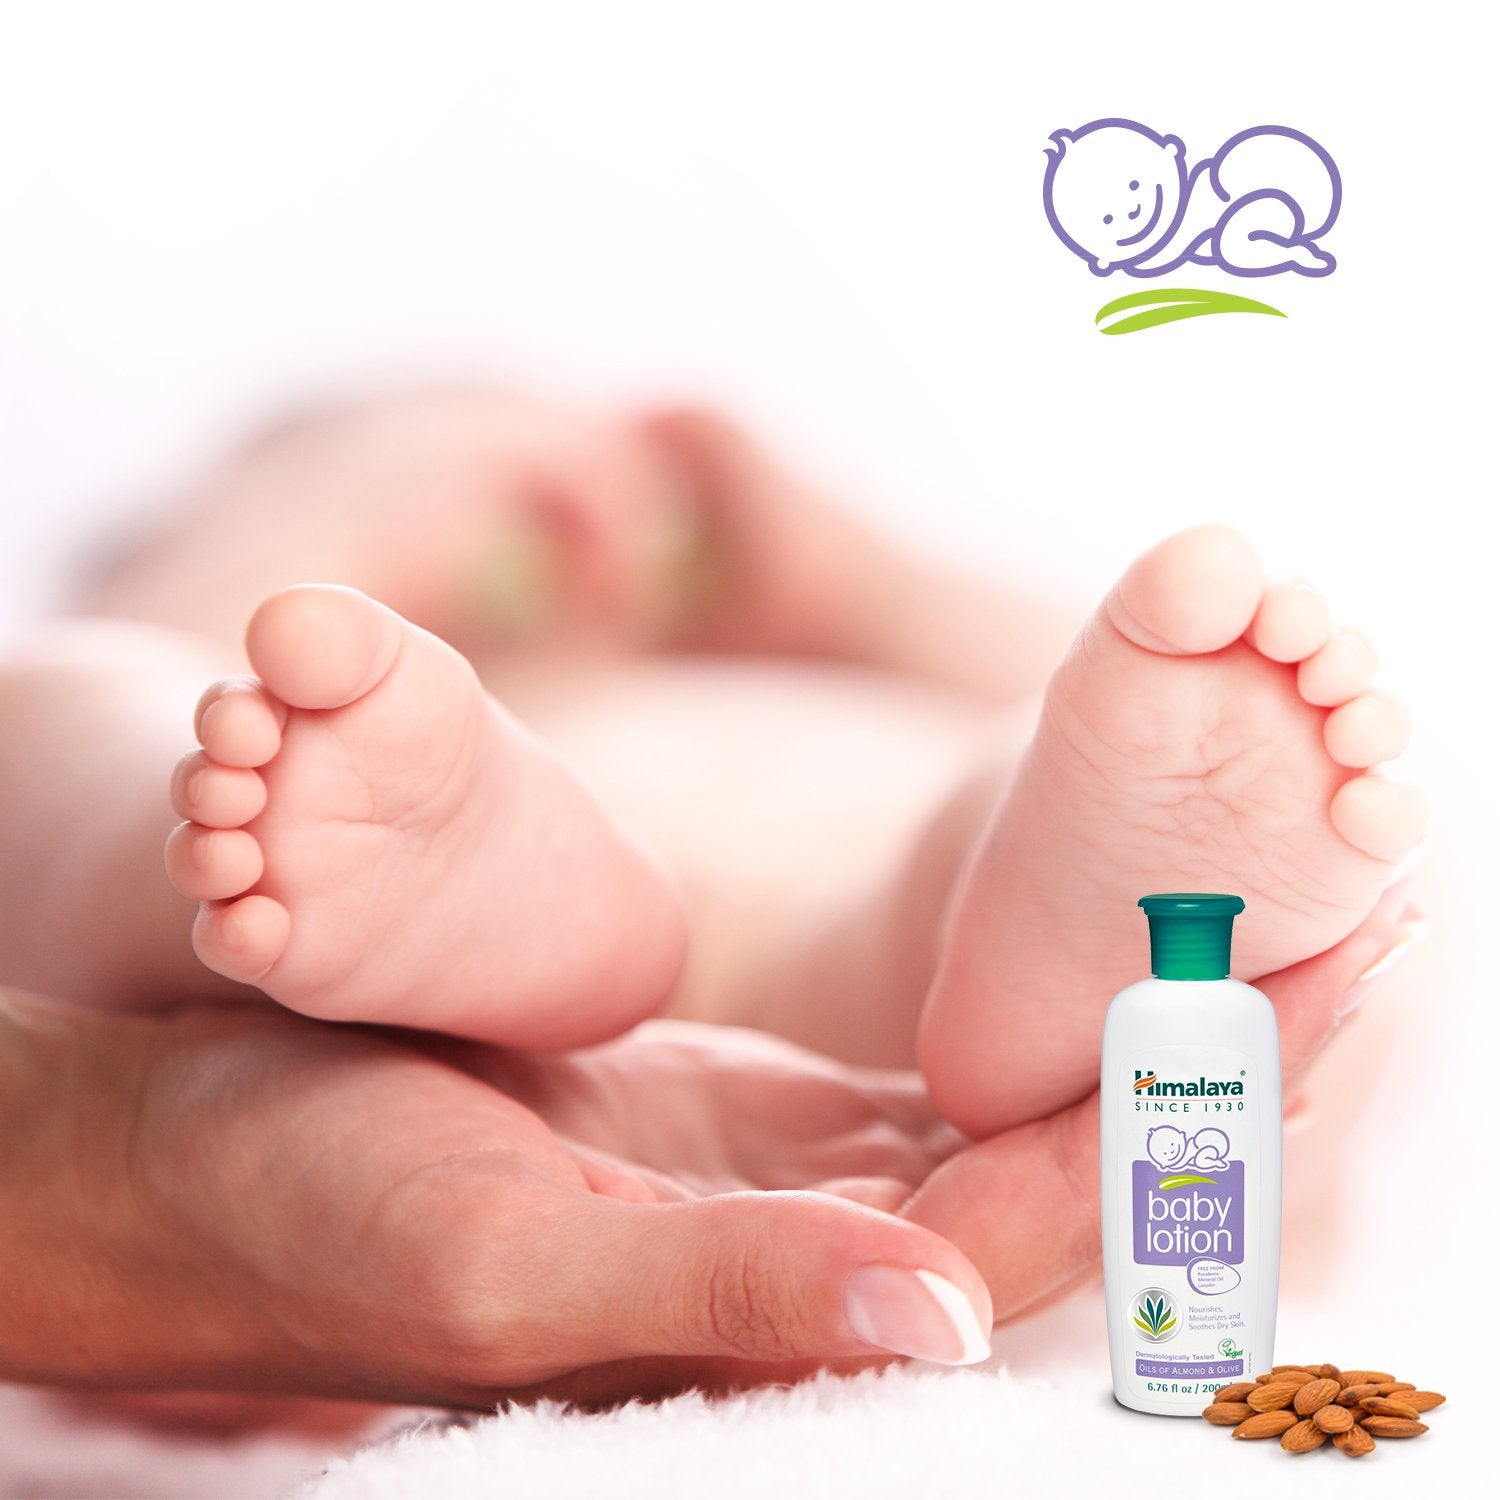 Himalaya Baby Lotion with Olive Oil and Almond Oil, Free from Parabens, Mineral Oil & Lanolin, Dermatologist Tested, 13.53 oz (400 ml) : Baby